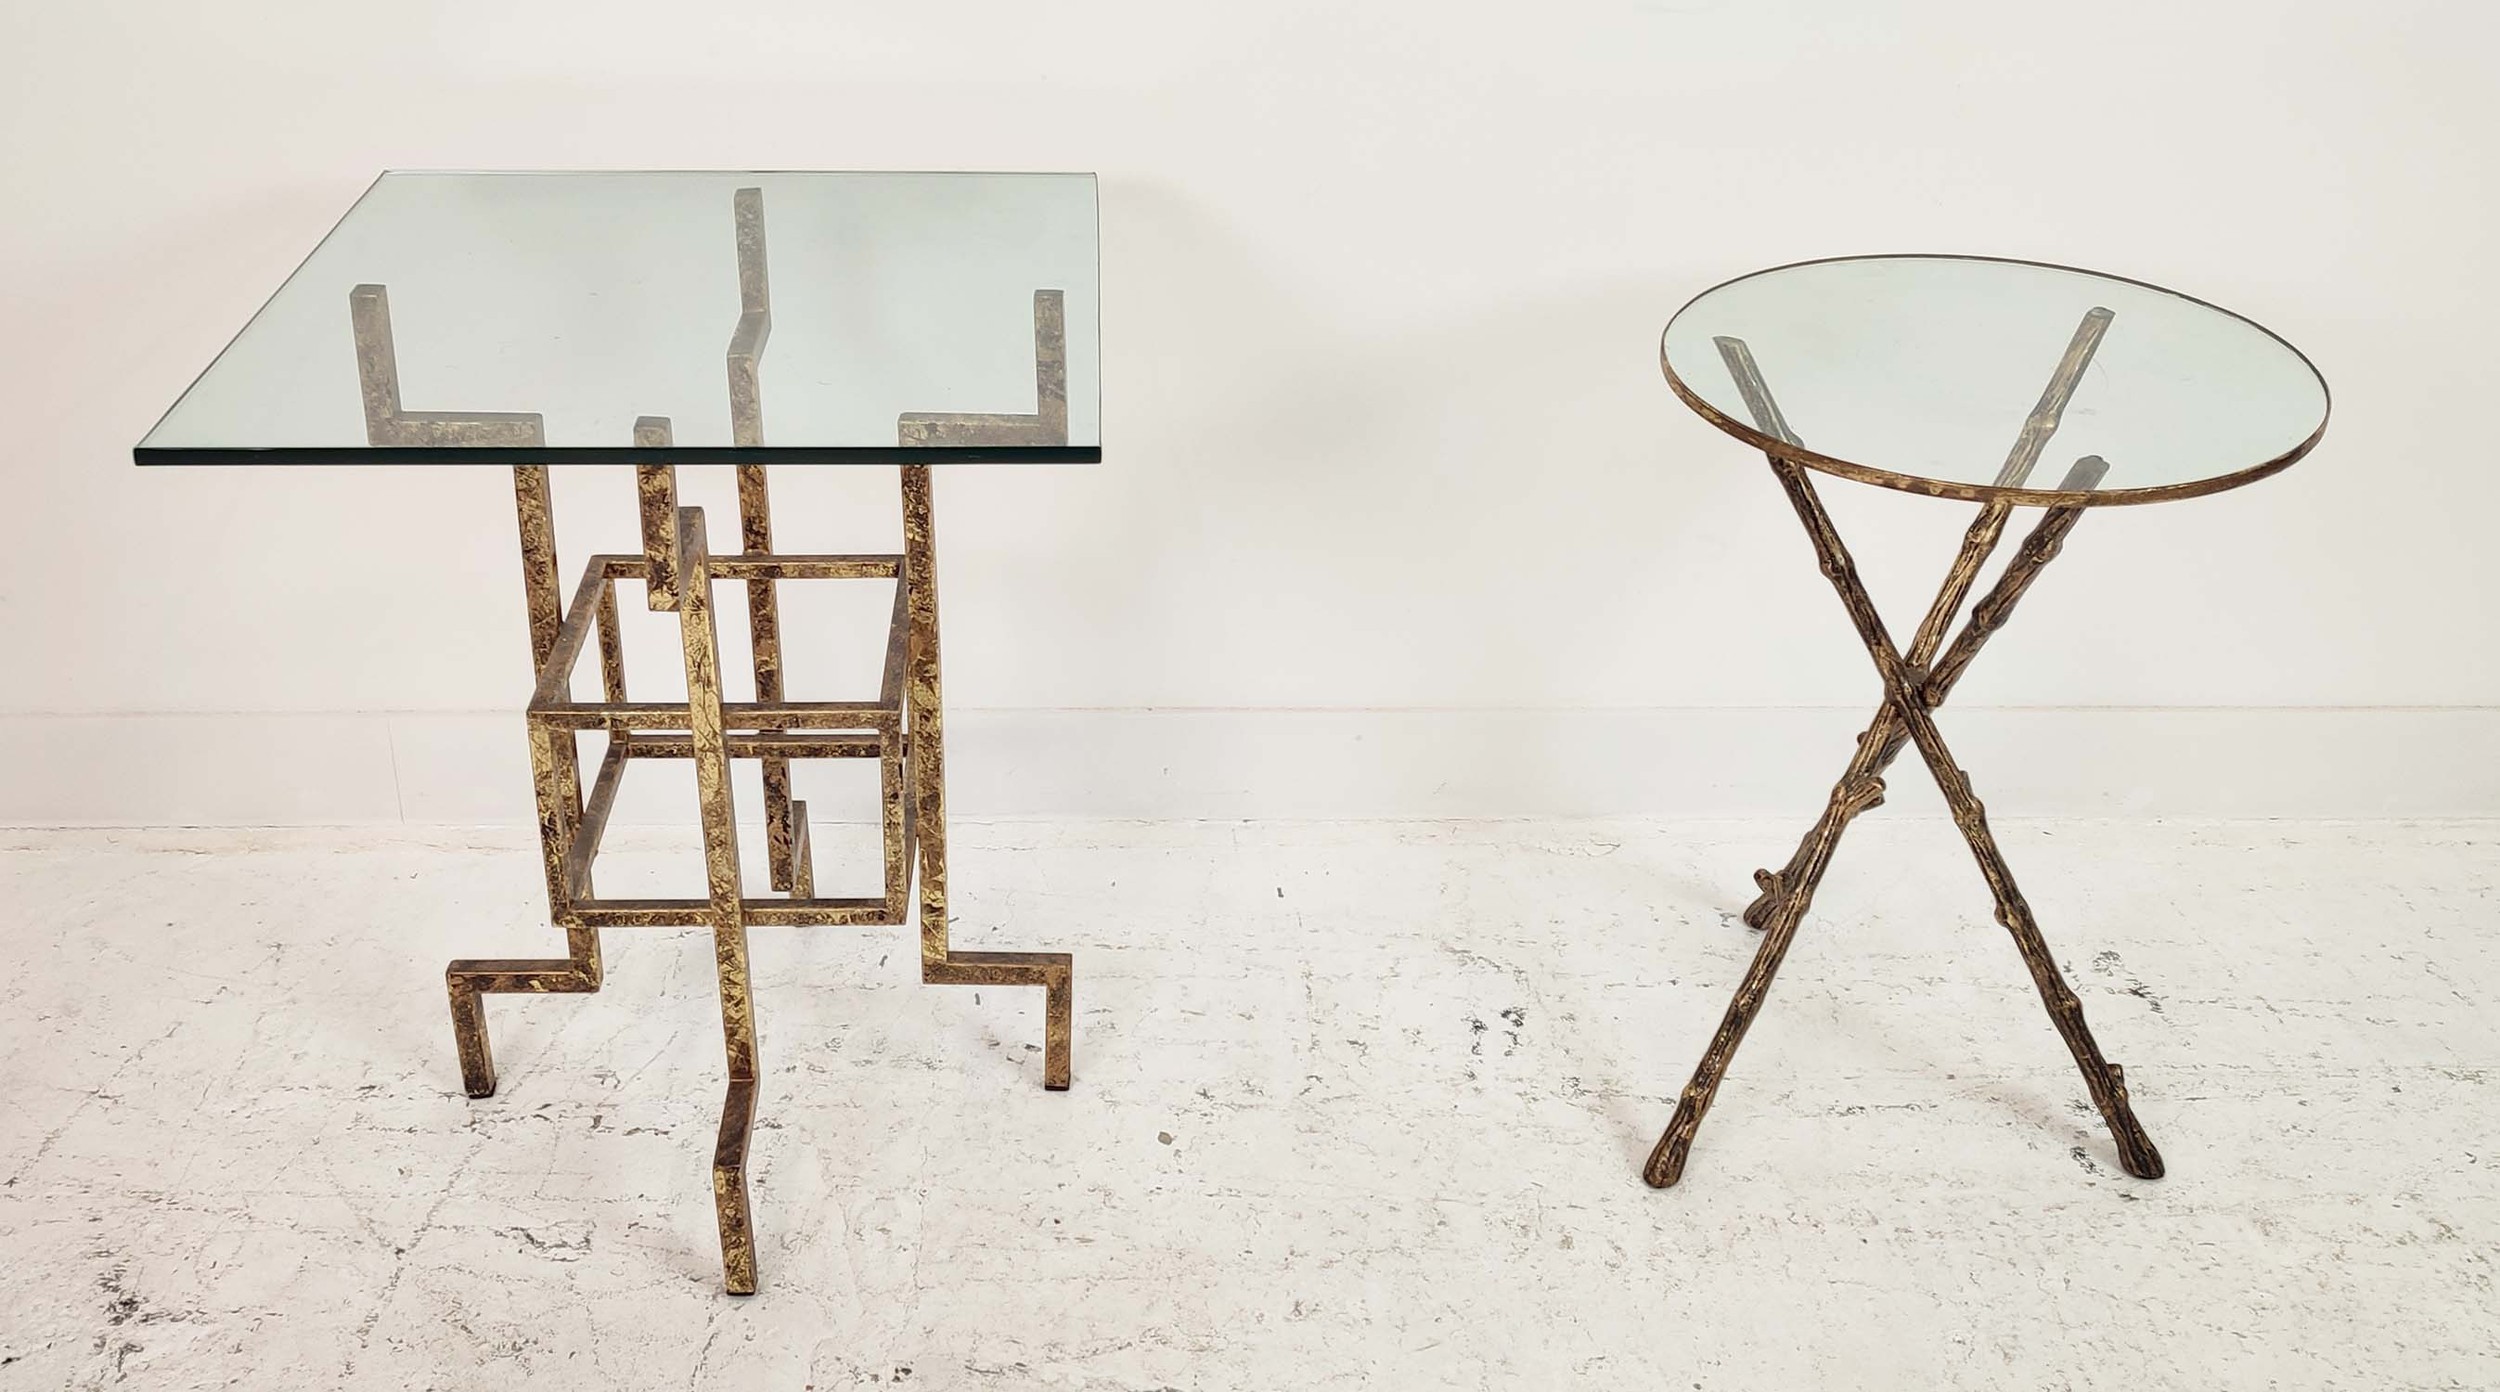 SIDE TABLES, two differing 1970s French inspired designs, gilt metal and glass. (2)